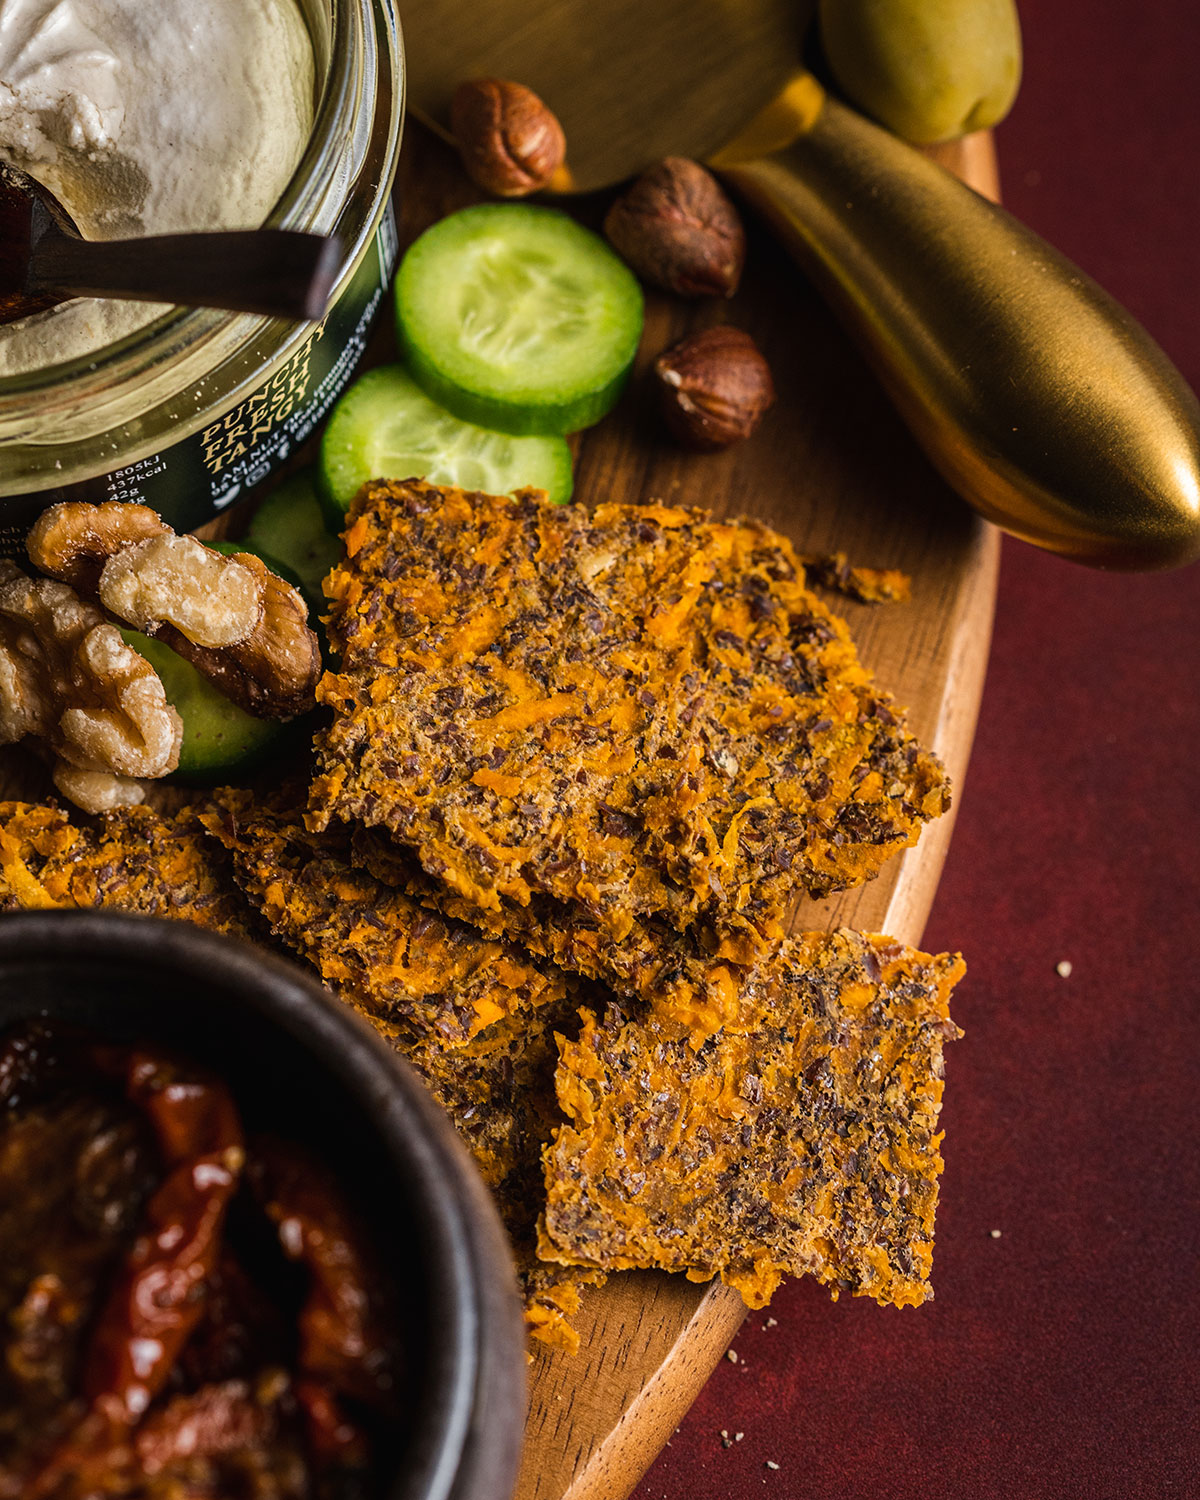 A close up photo of a vegan cheeseboard corner with homemade sweet potato crackers piled up on the edge, a cheese knife, sundried tomatoes, nuts and cucumbers places alongside.